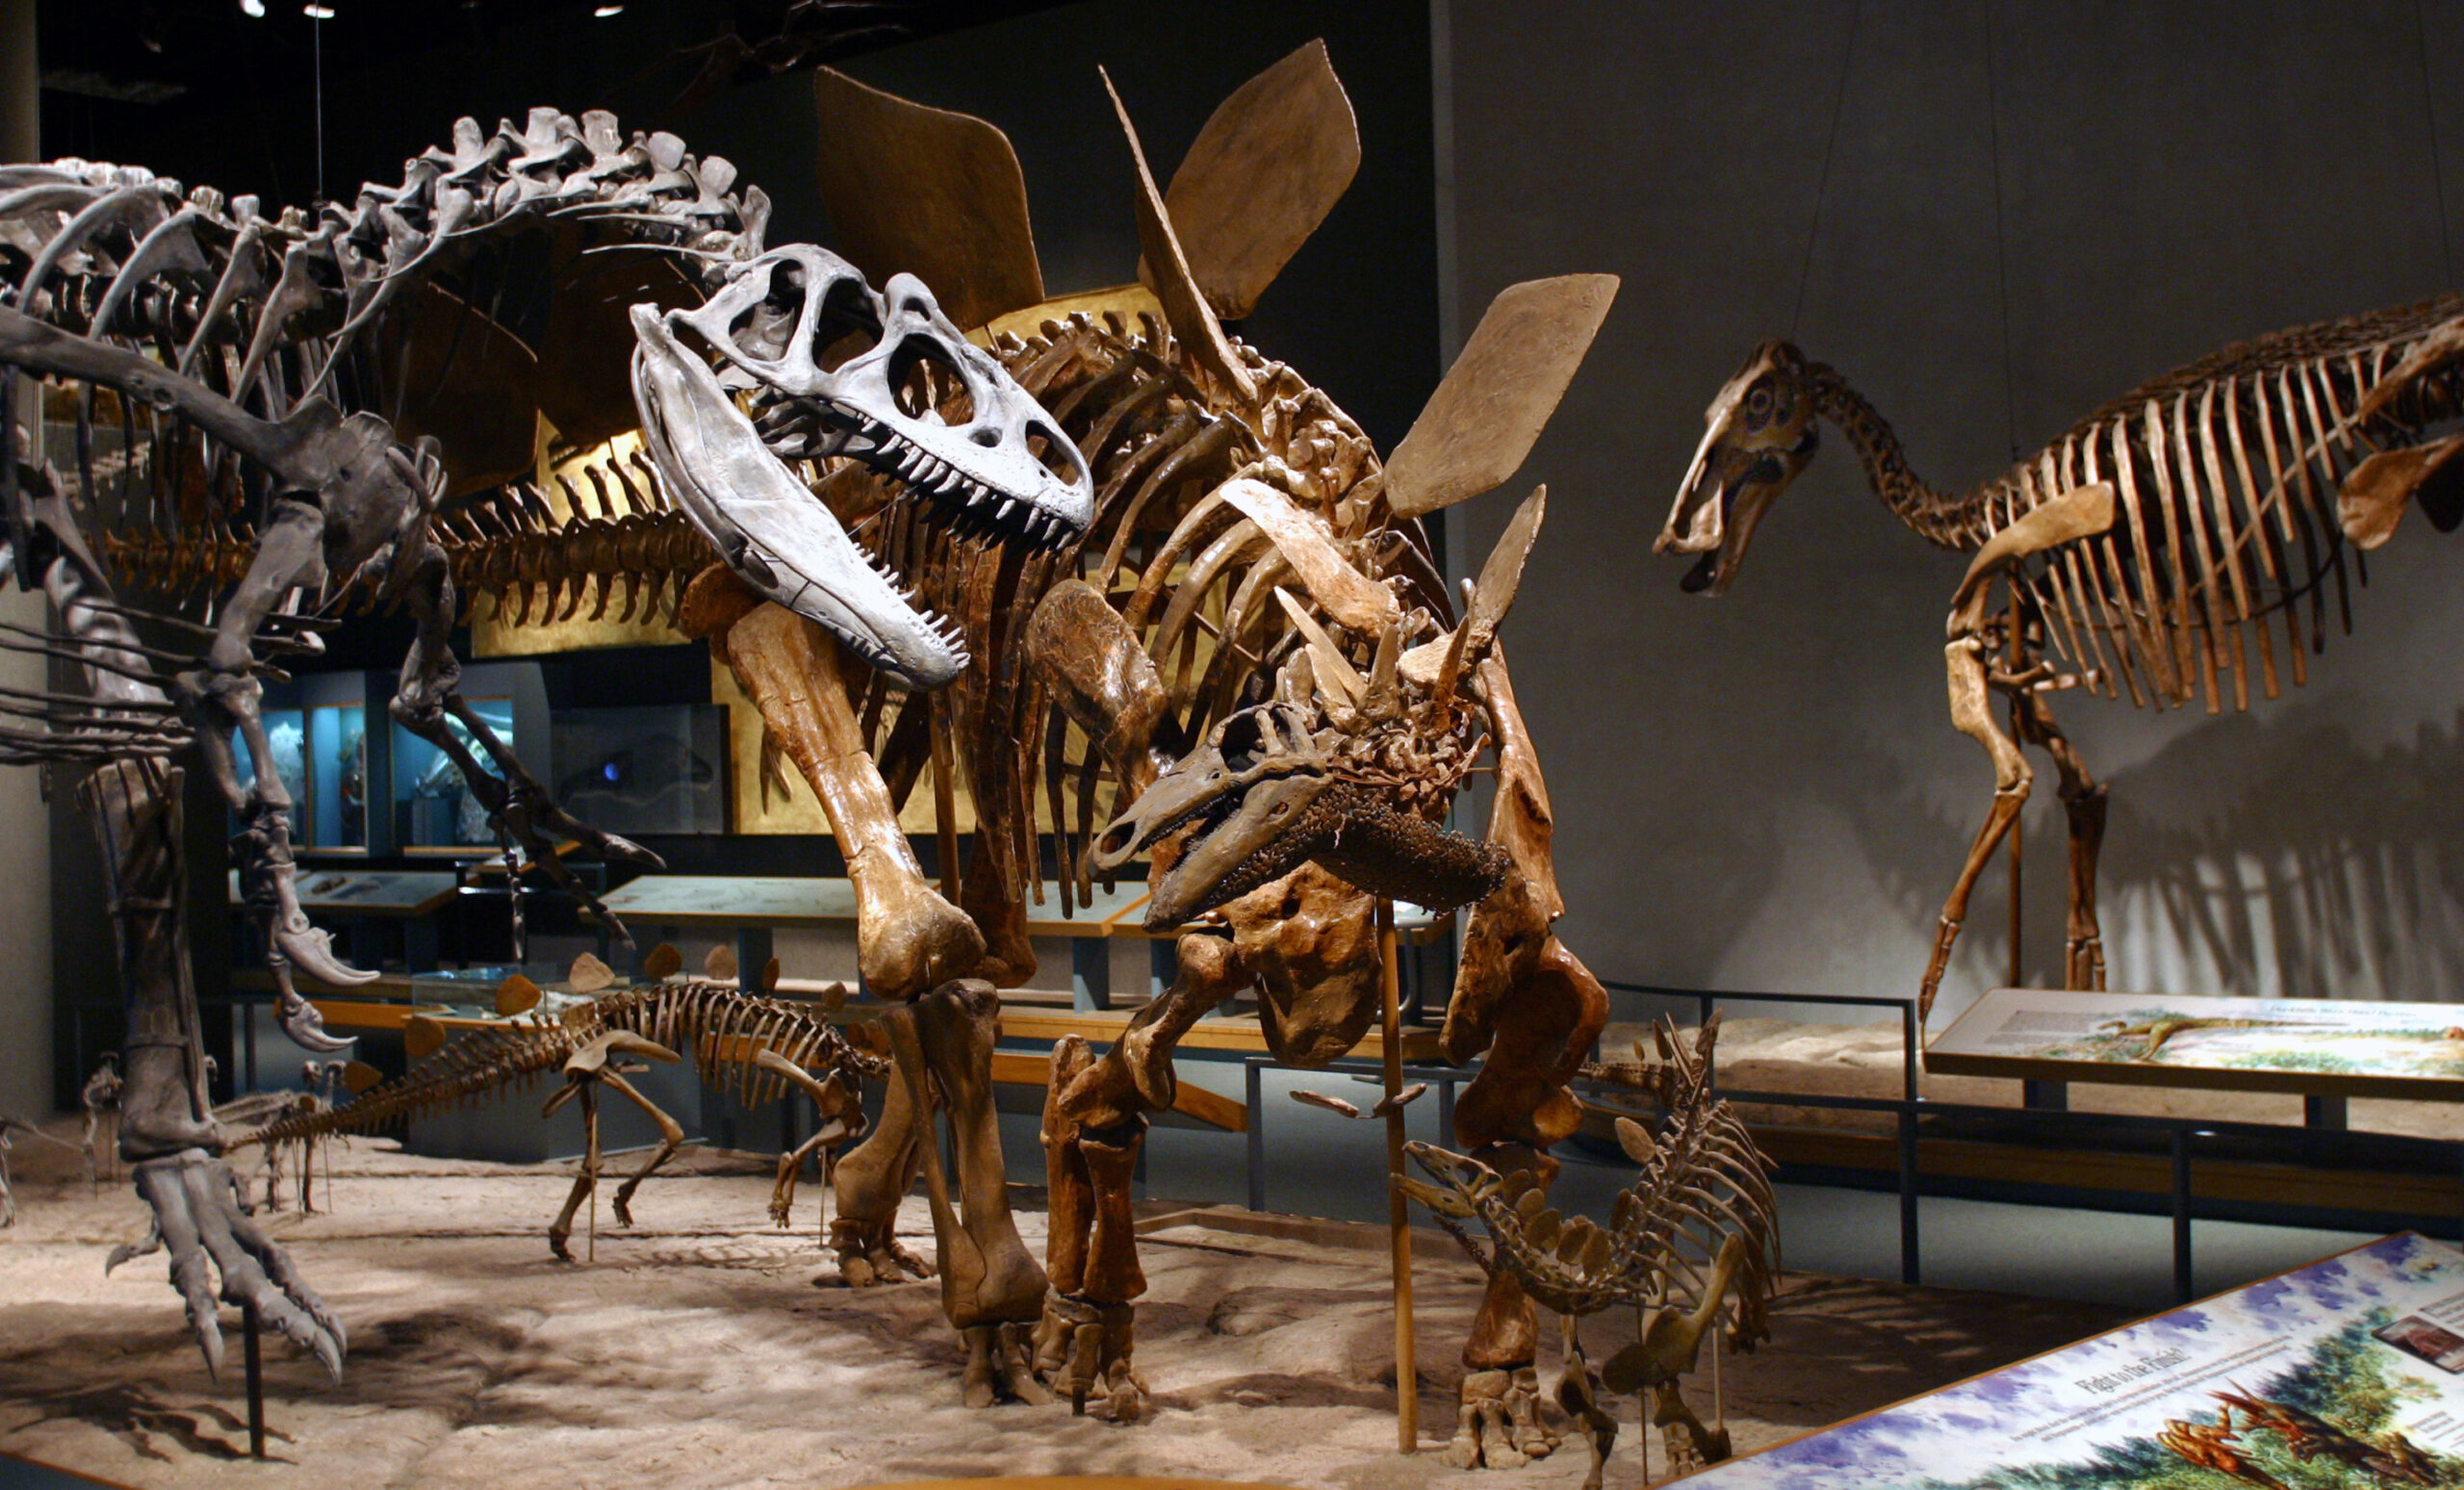 Free admission to the Denver Museum of Nature & Science this weekend – presented by 98.5 KYGO